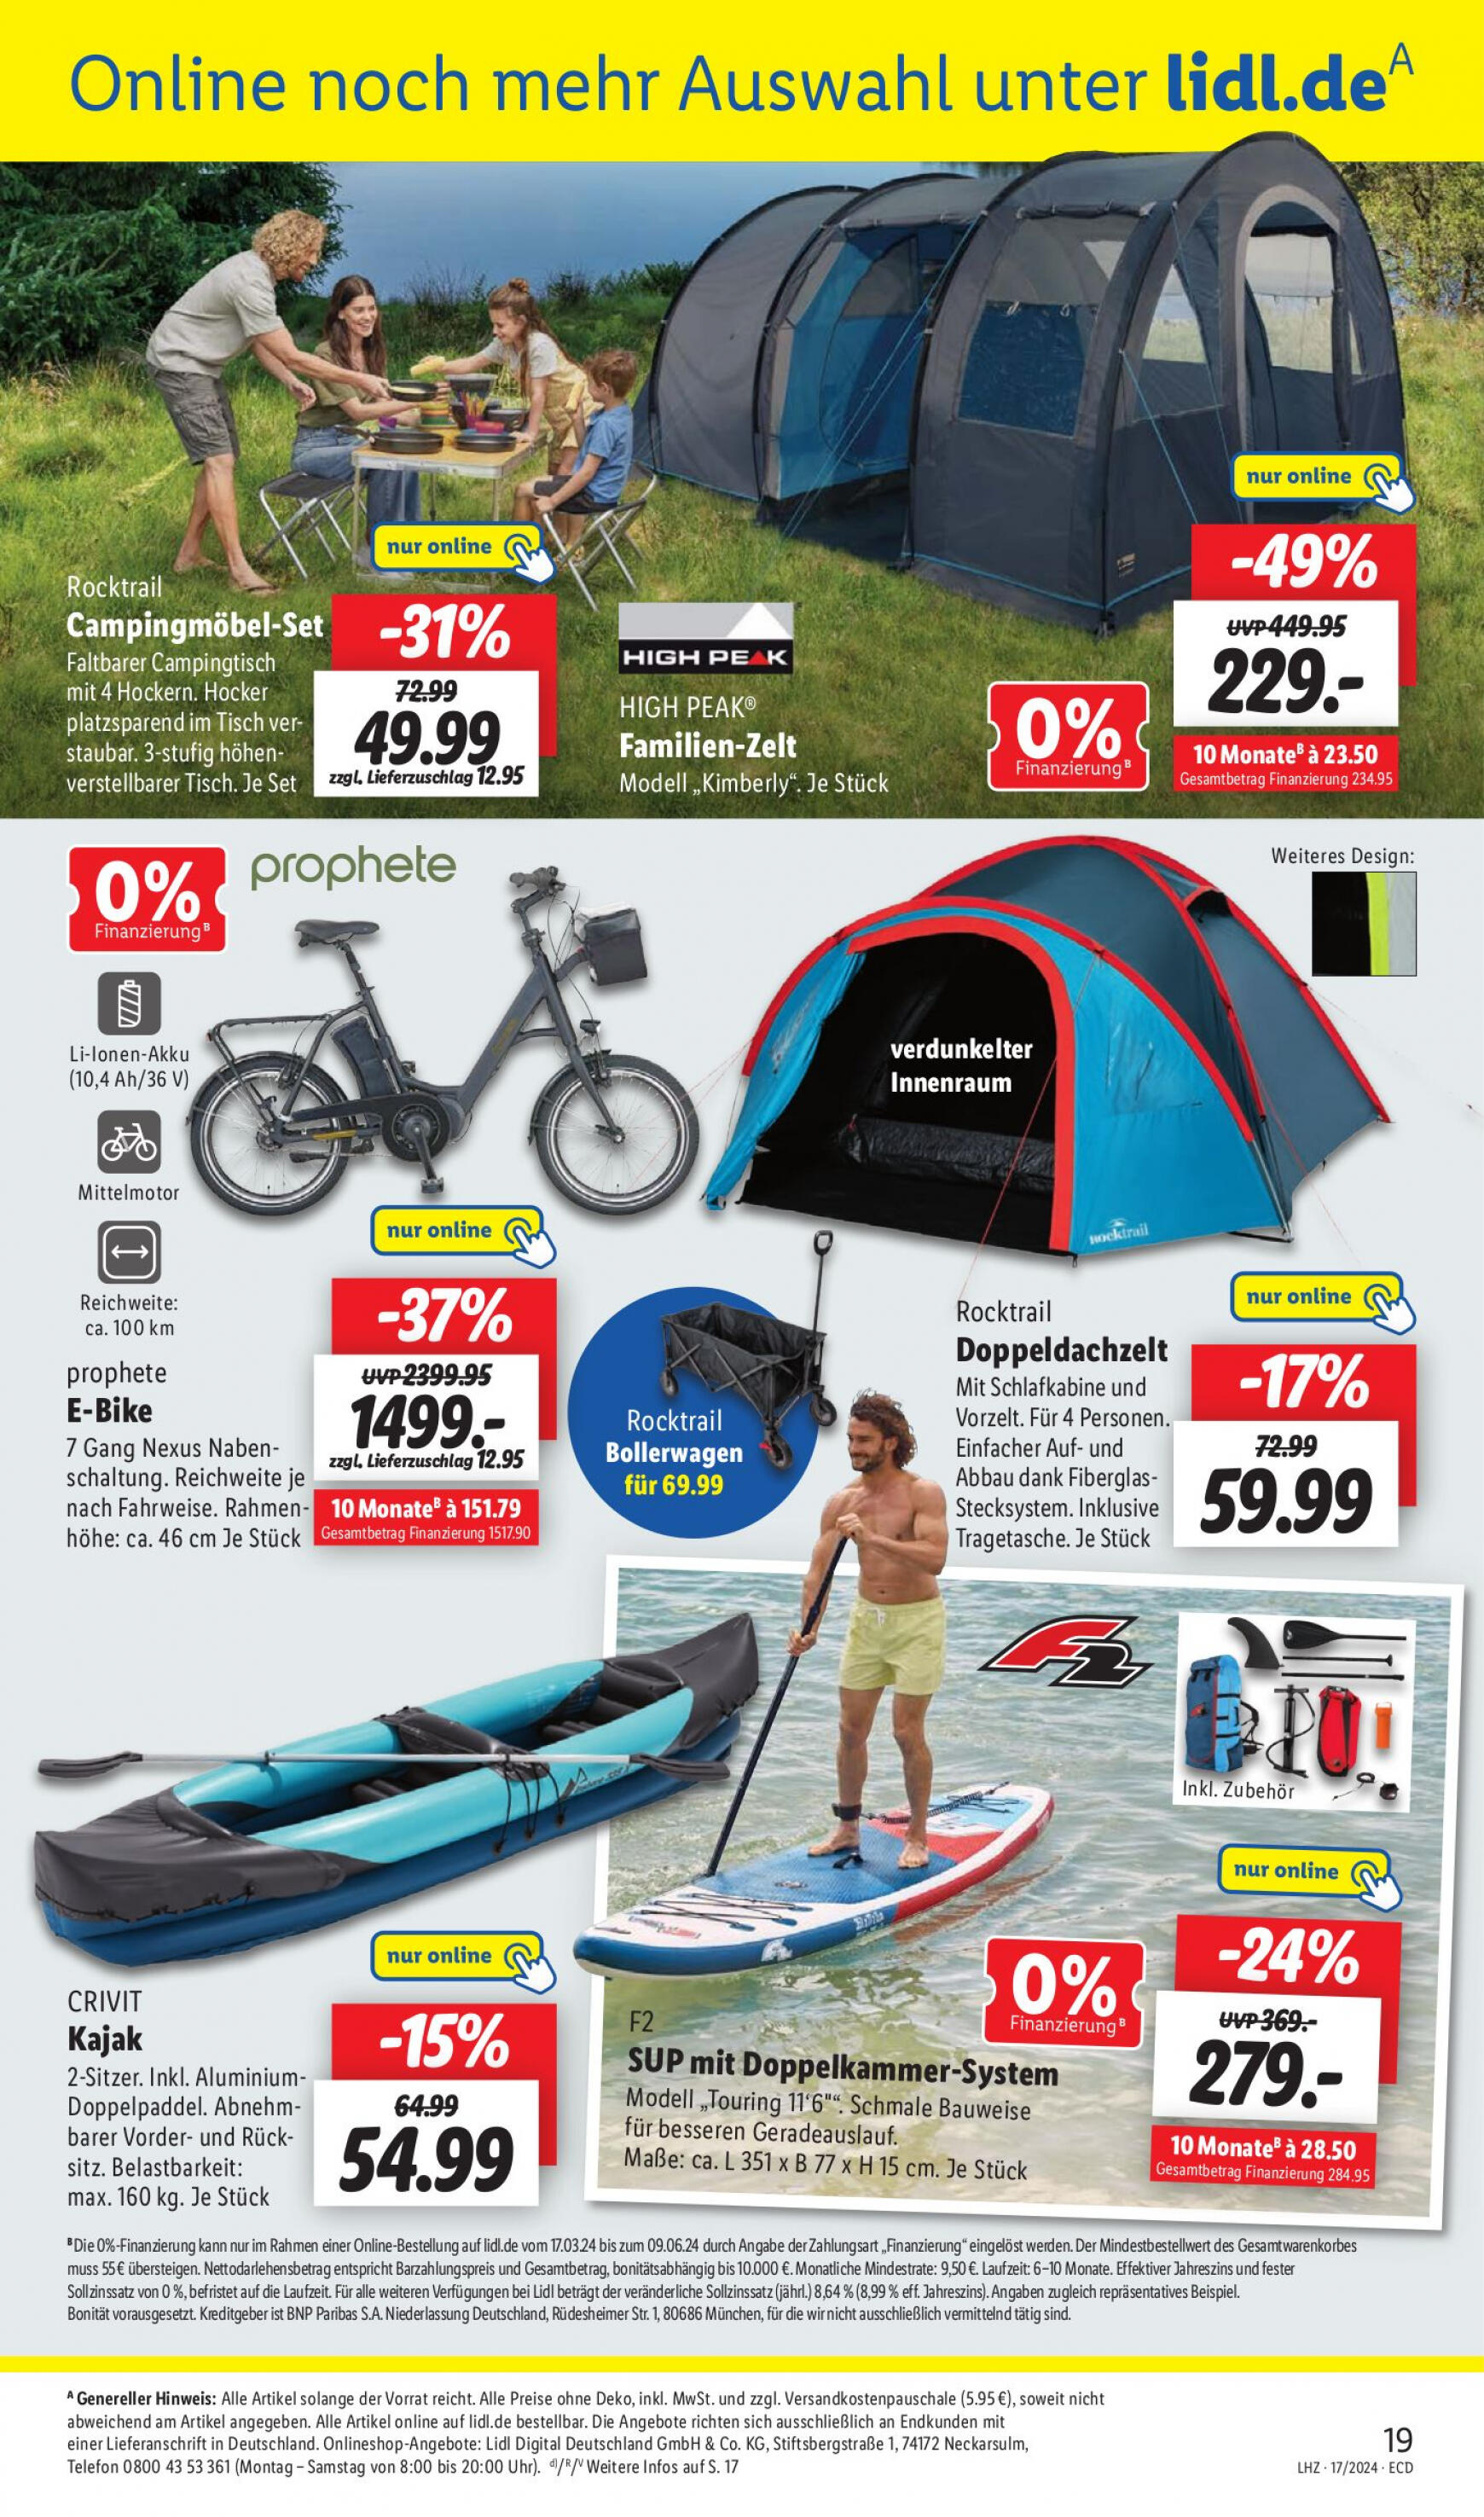 lidl - Flyer Lidl aktuell 22.04. - 27.04. - page: 23